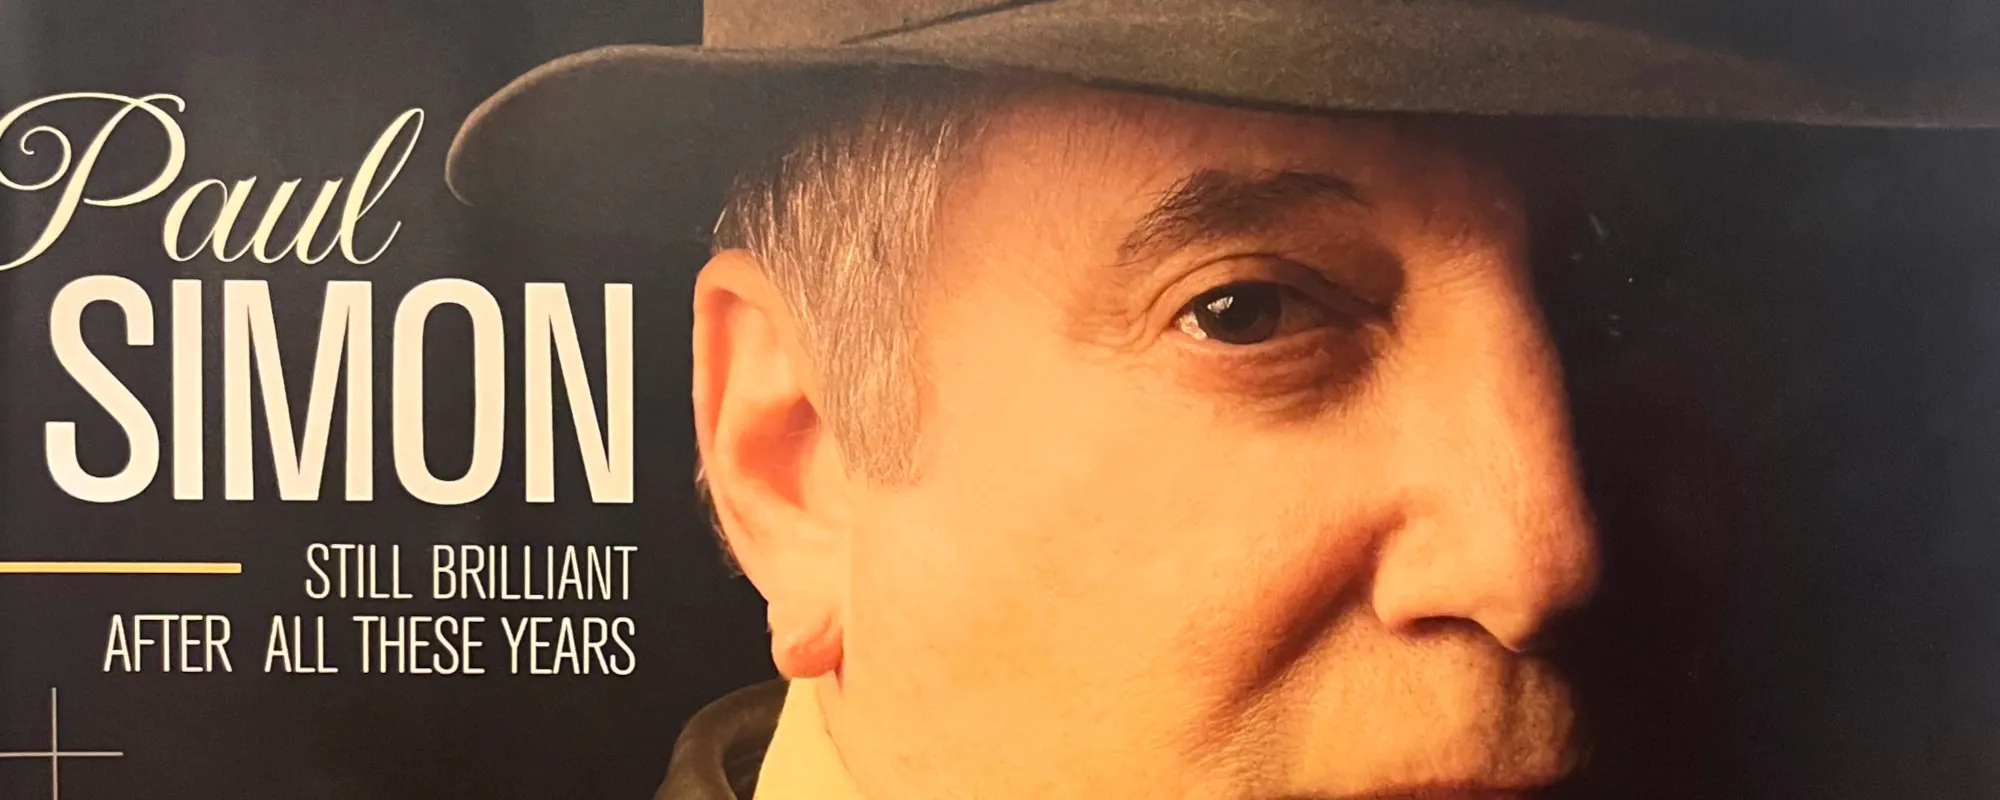 A Look Back: “I Know What I Know”—Paul Simon on Songwriting (American Songwriter 2011 Cover Story)